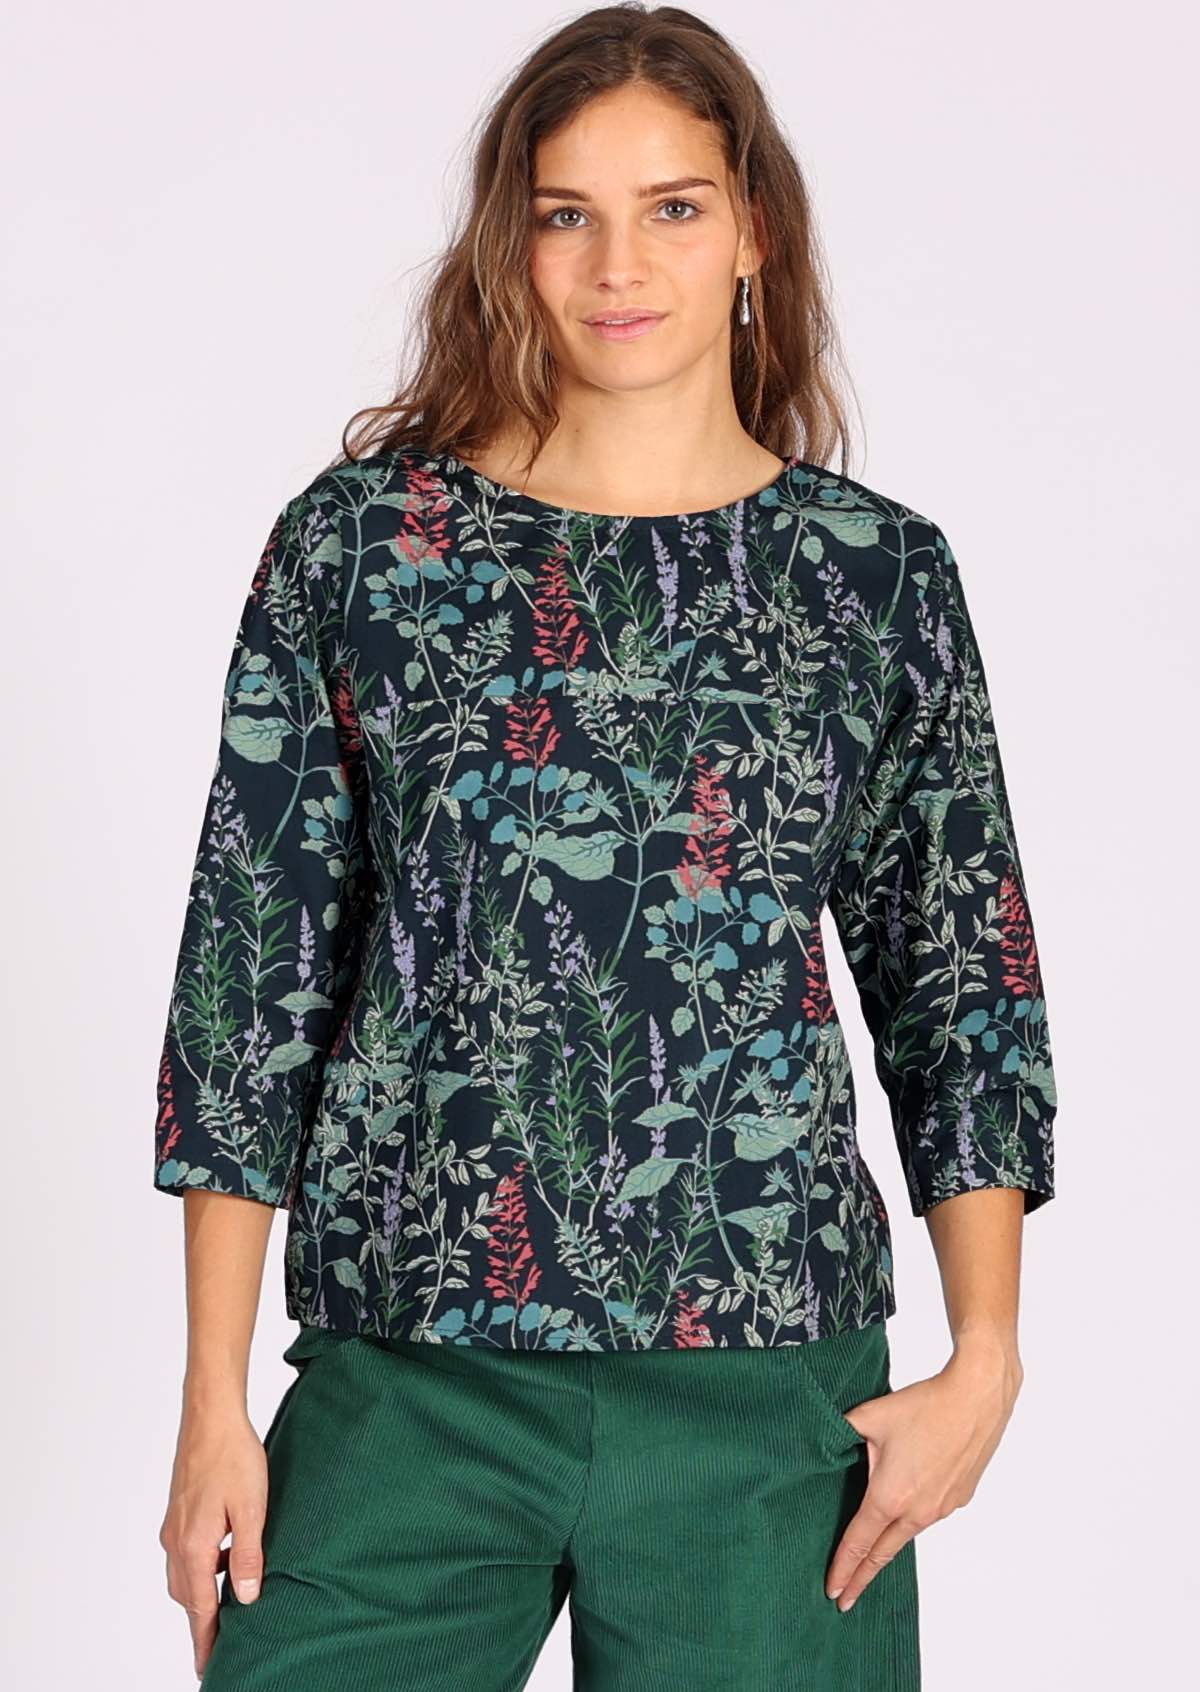 Dark teal based floral print cotton relaxed fit top with 3/4 sleeves